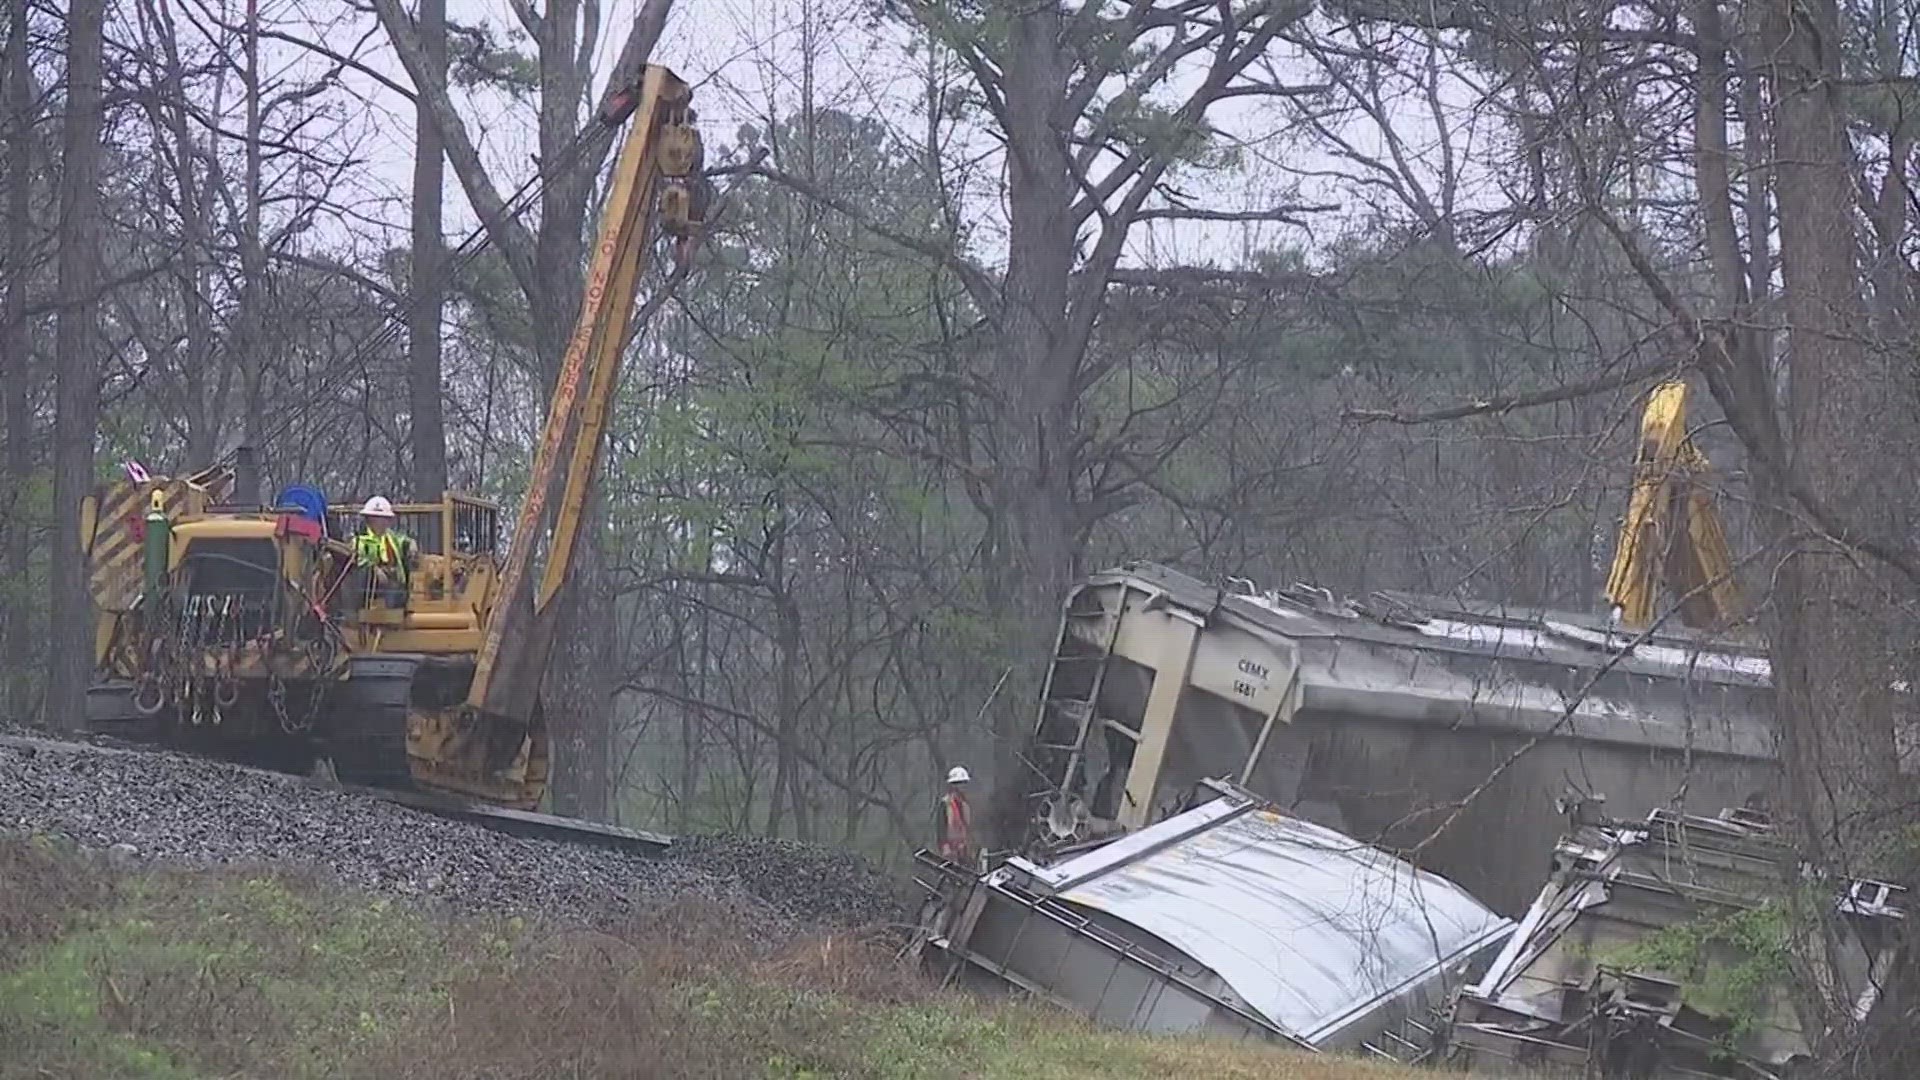 Yet another train derailment has happened, as railroad officials face questioning over recent incidents.